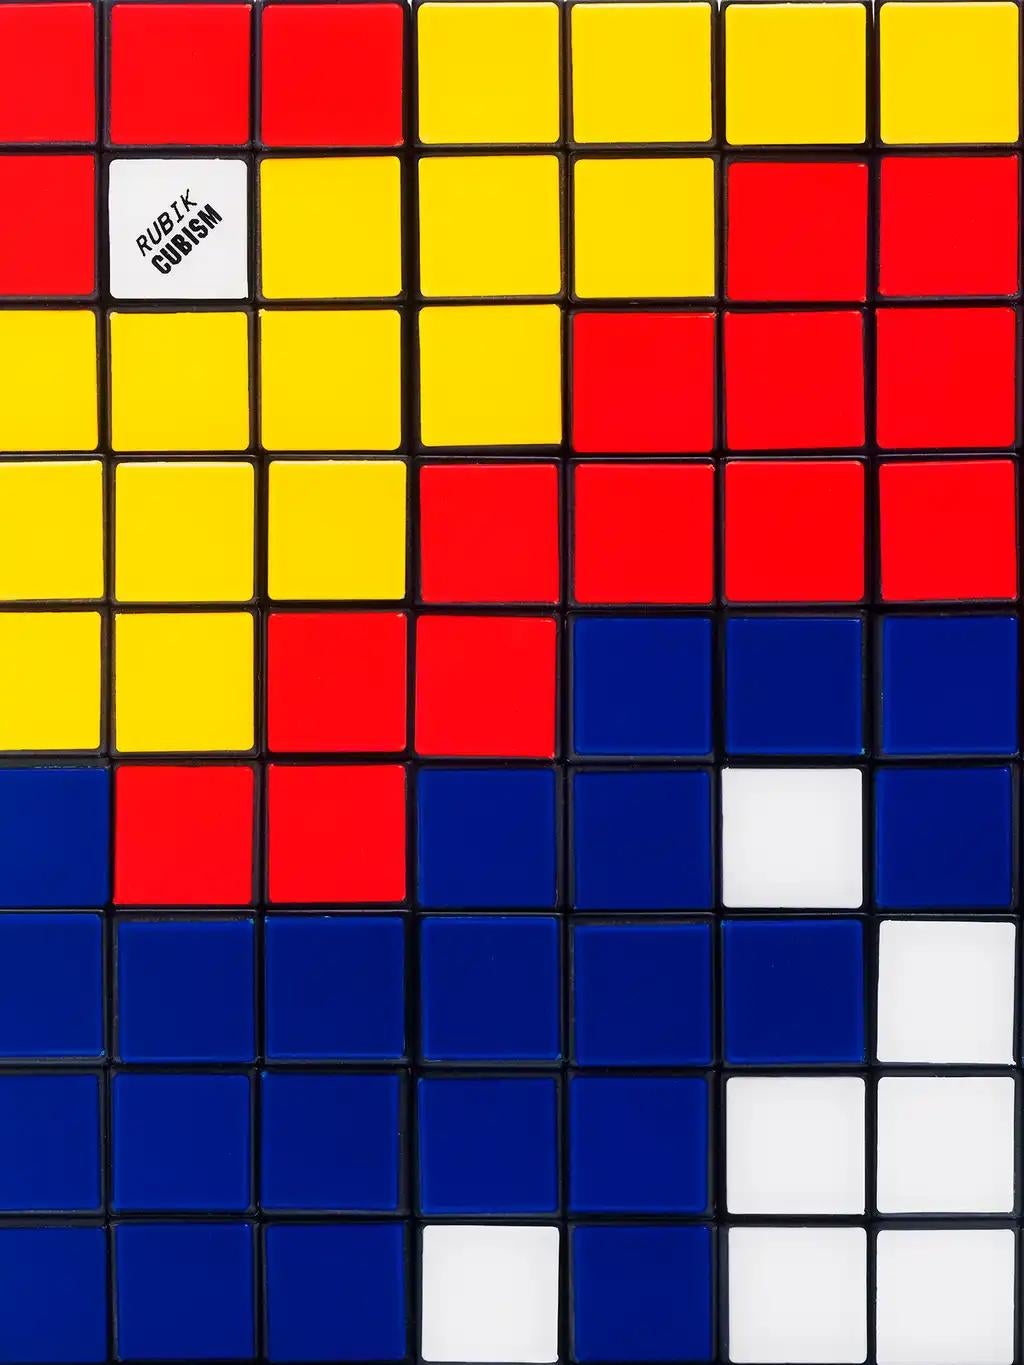 Invader
Rubik Camouflage
Hand signed and numbered by Invader
100 cm x 100 cm
Limited Edition of 812
Diasec-mounted Giclee on aluminium composite panel, weighing 13.5kg